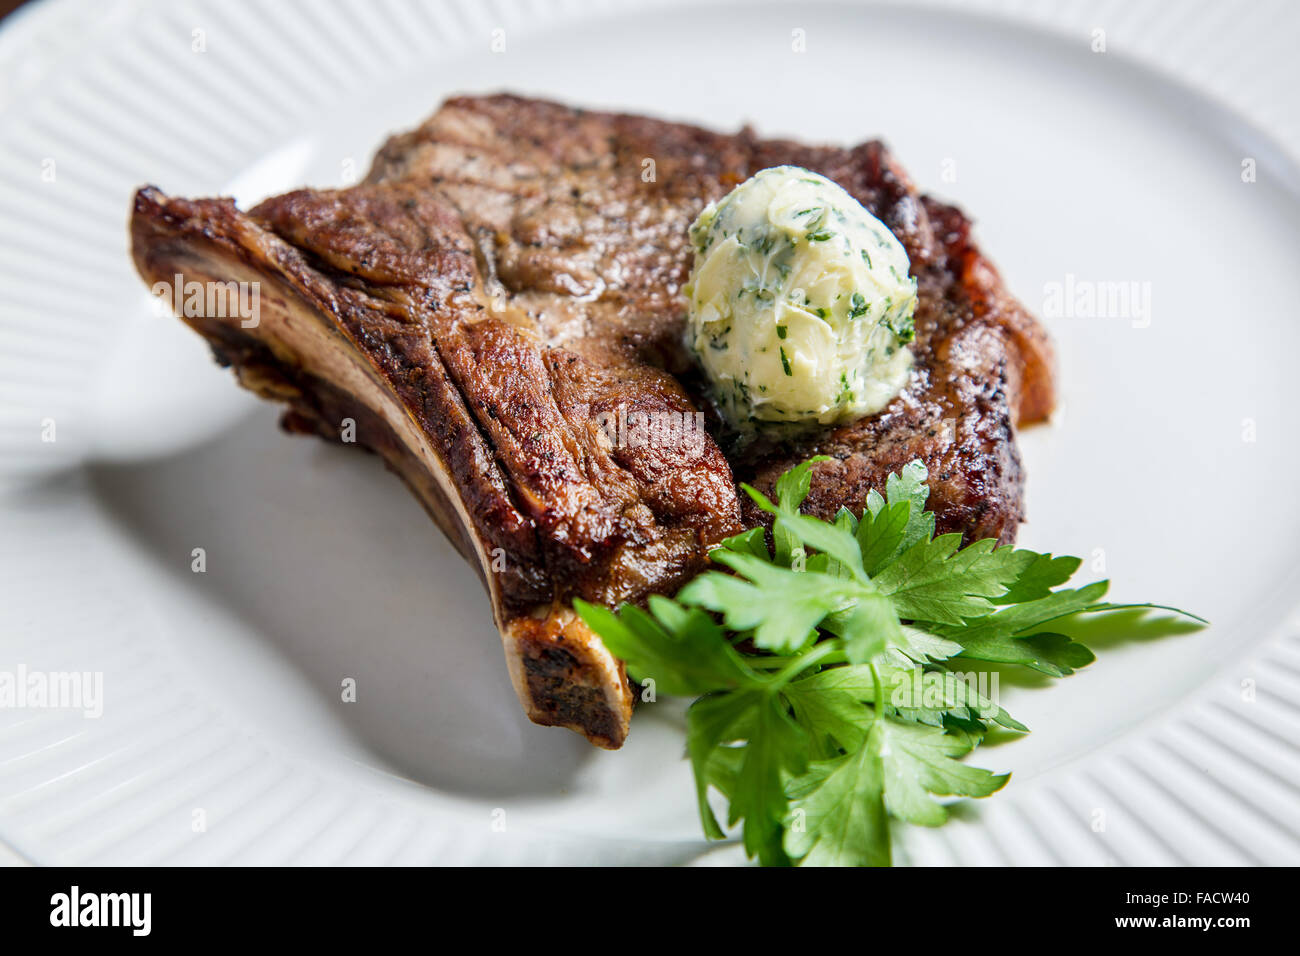 Juicy veal rib steak with green oil Stock Photo